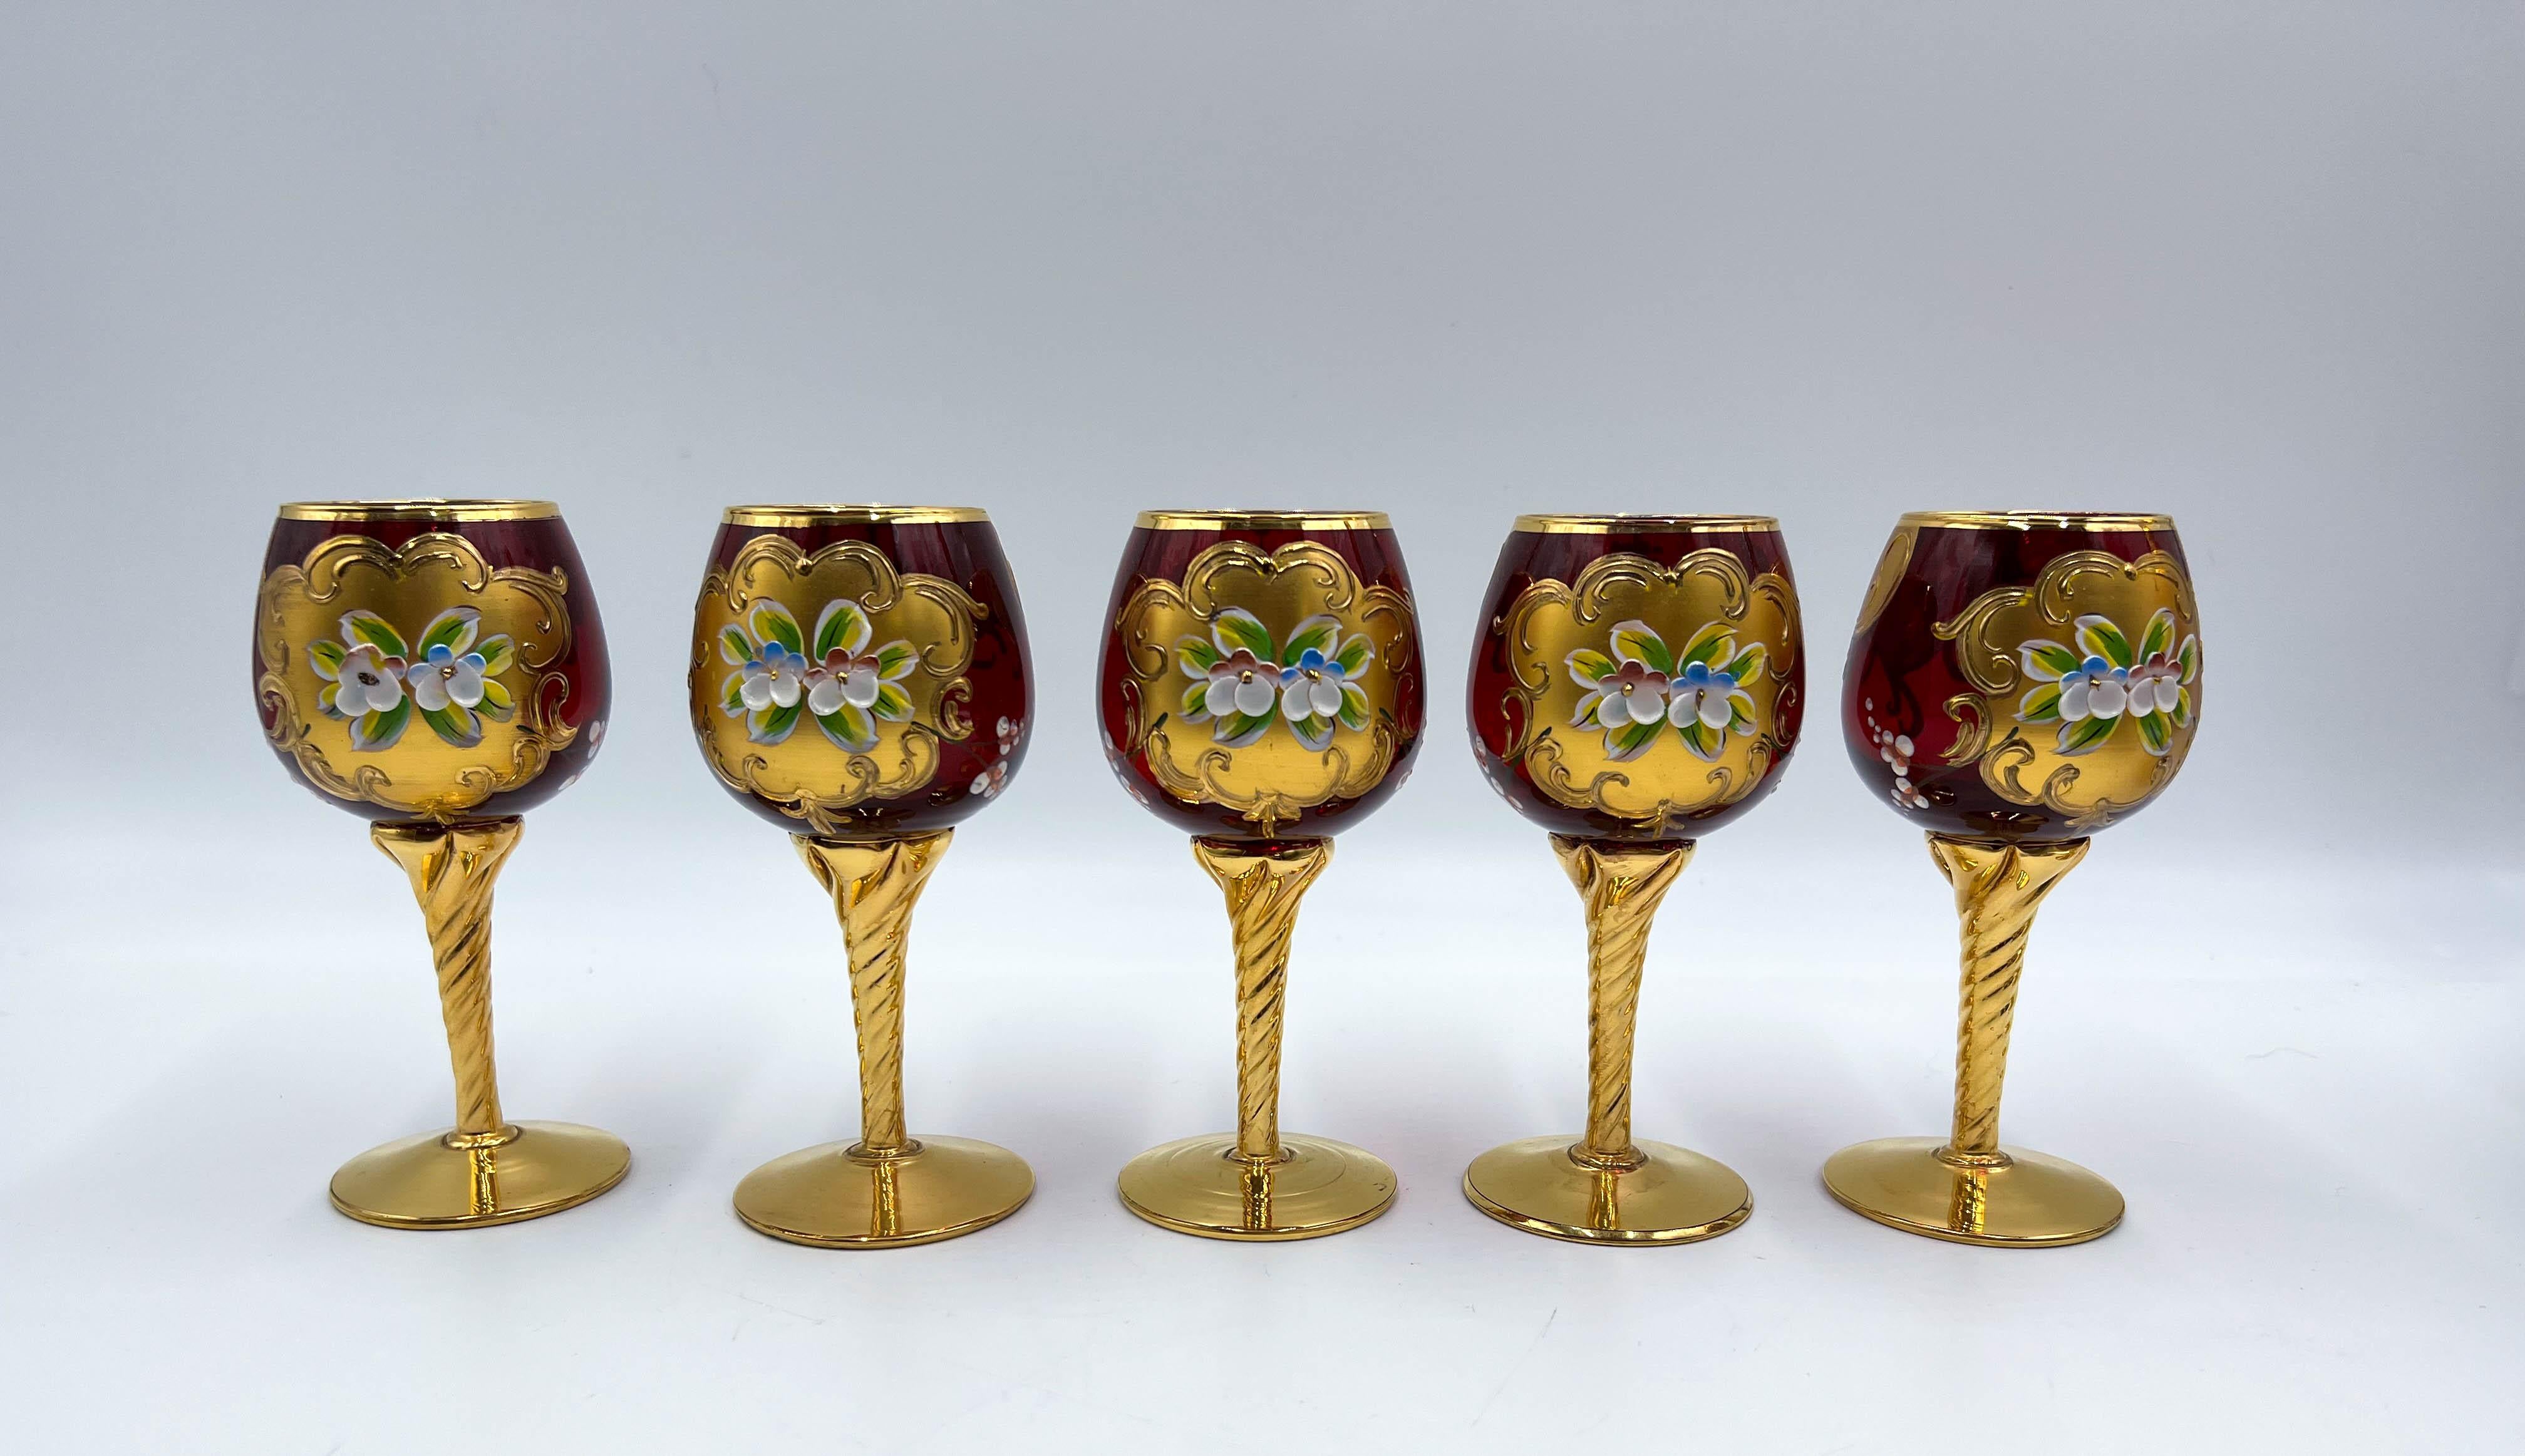 Vintage Tre Fuochi Venetian Murano Glass Ruby Red Goblets and Pitcher, 8 Pc Set In Good Condition For Sale In Palm Beach Gardens, FL